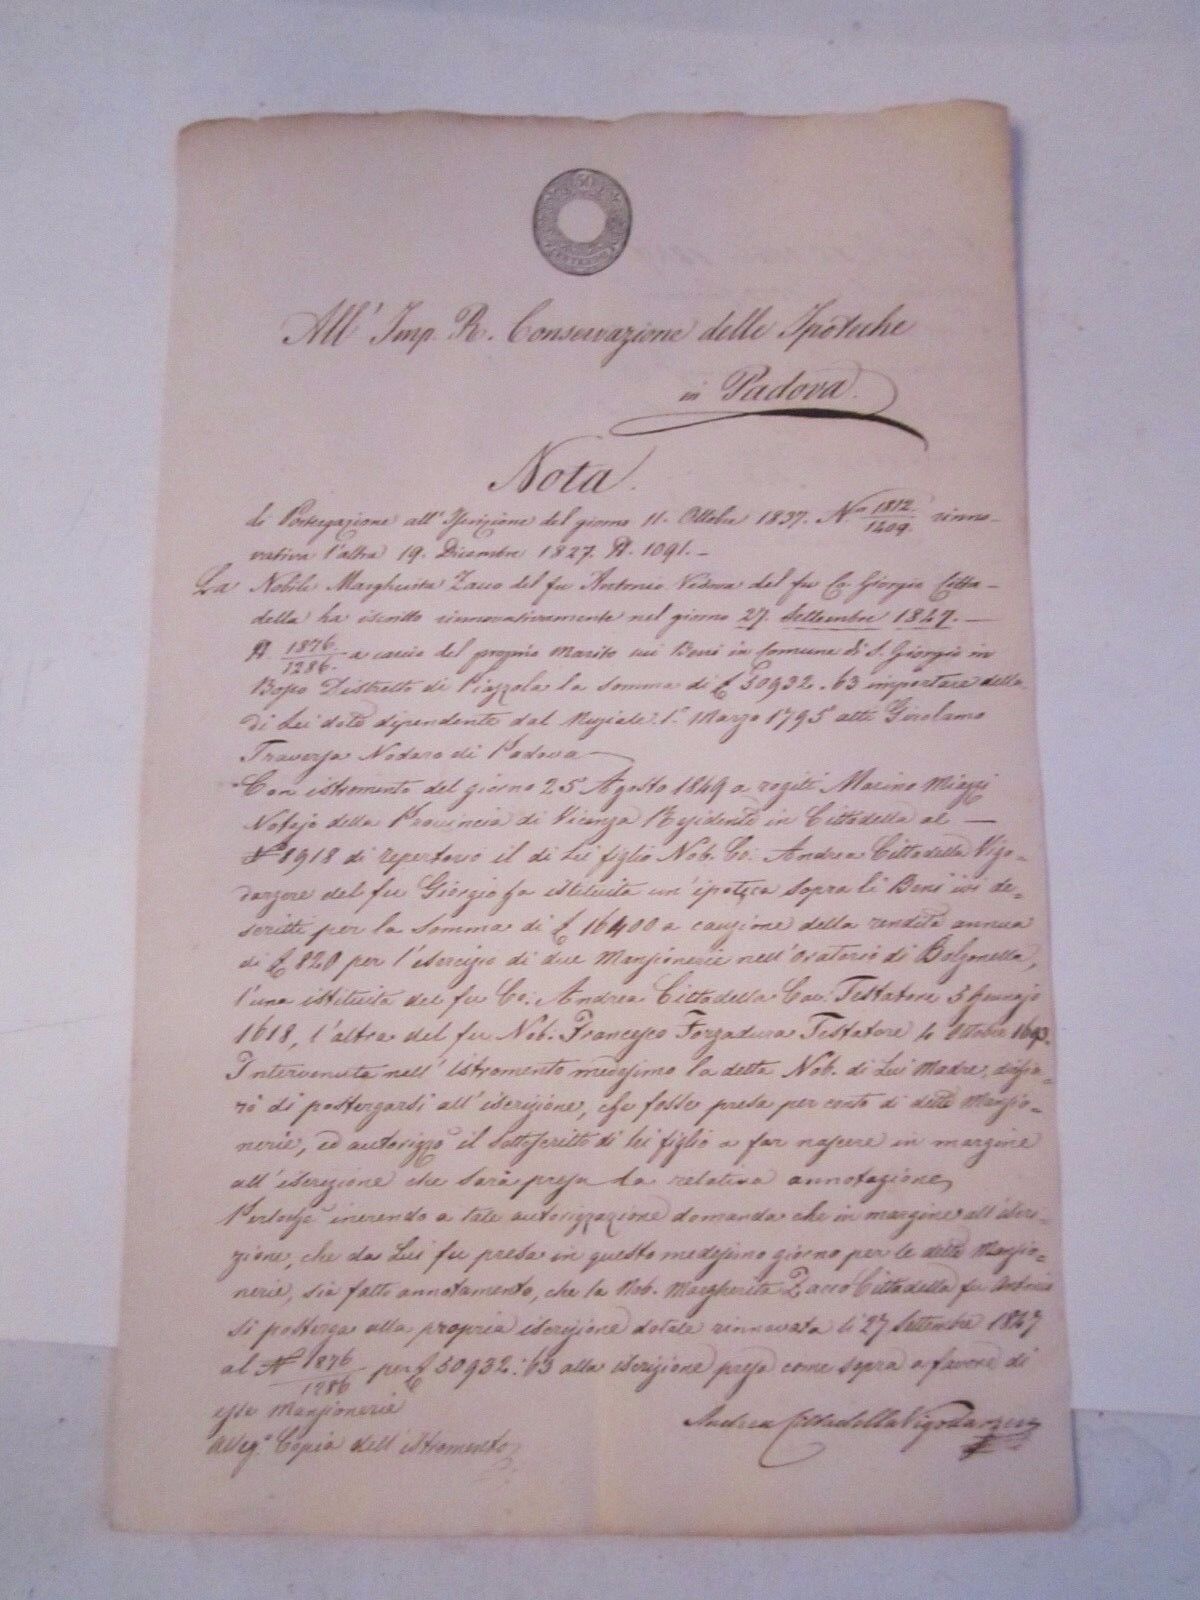 ANTIQUE 1847 LEGAL DOCUMENT - IN ITALIAN - NOTORIZED - AUTHENTIC - TUB BBBK